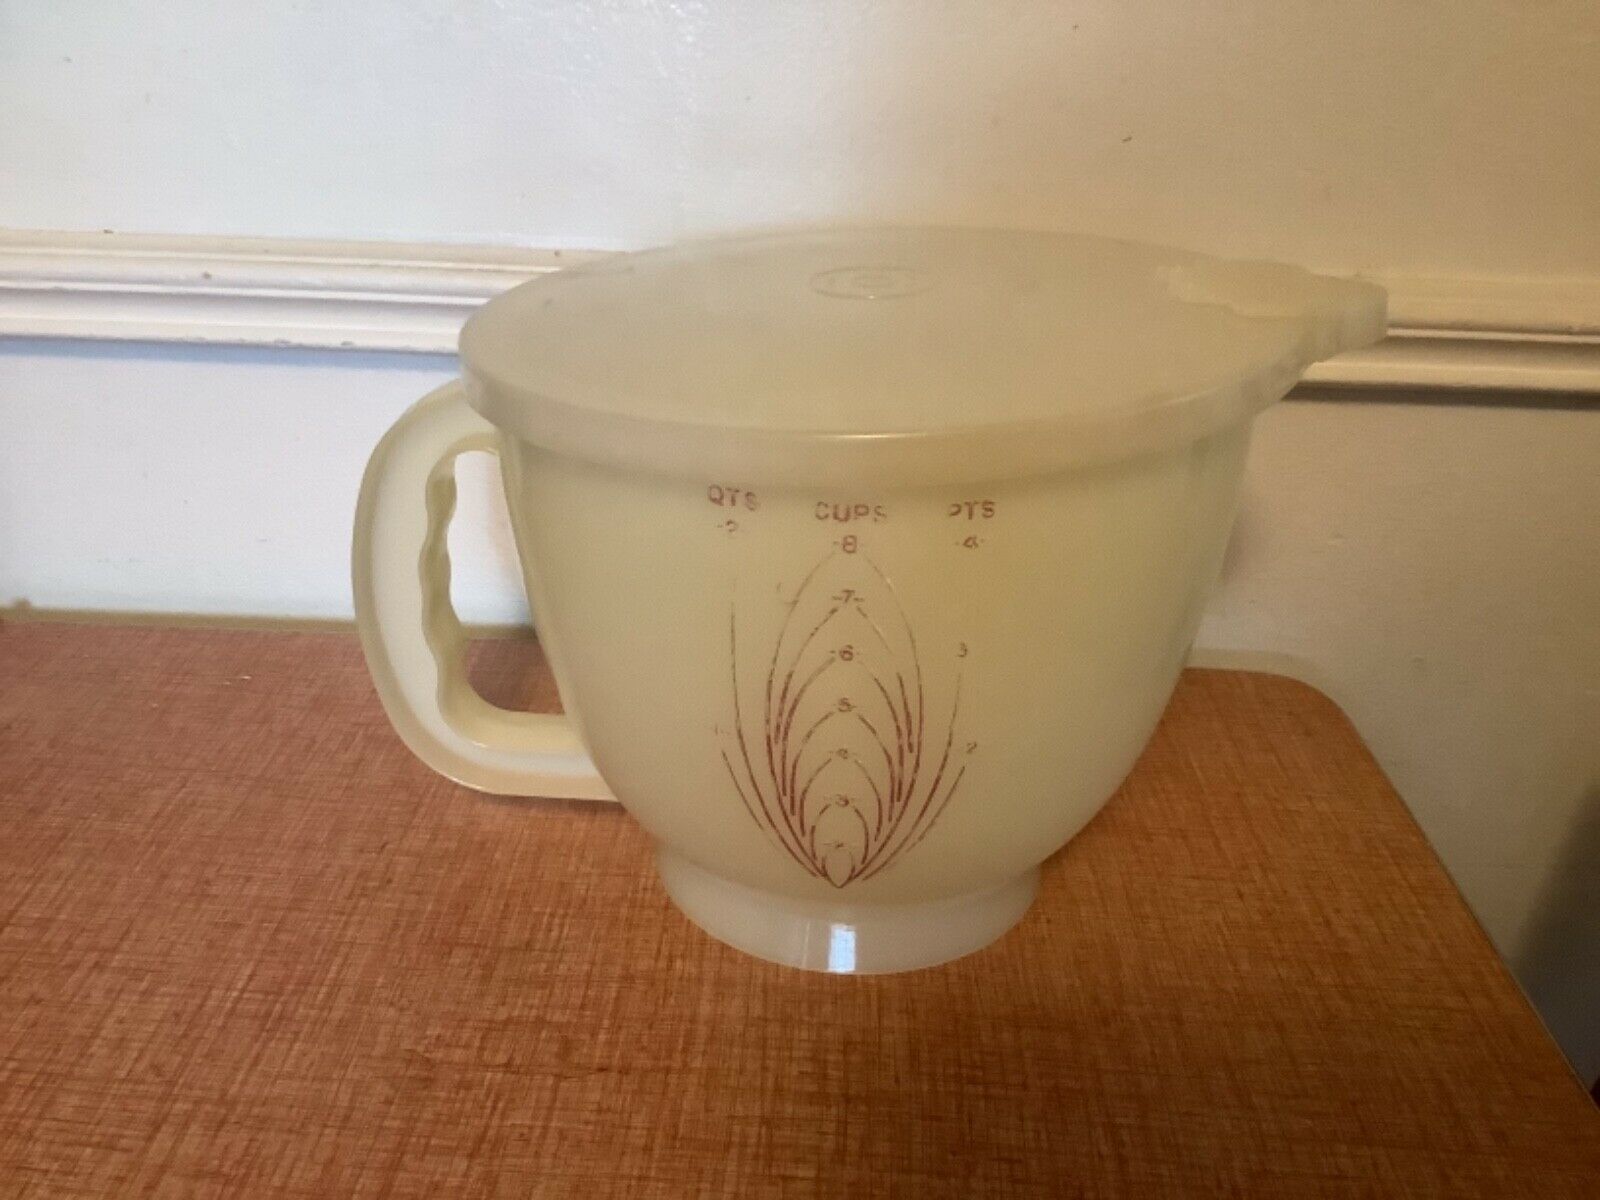 1977 Tupperware Mix-N-Store 8 Cup 2 Qt Measuring Bowl Pitcher